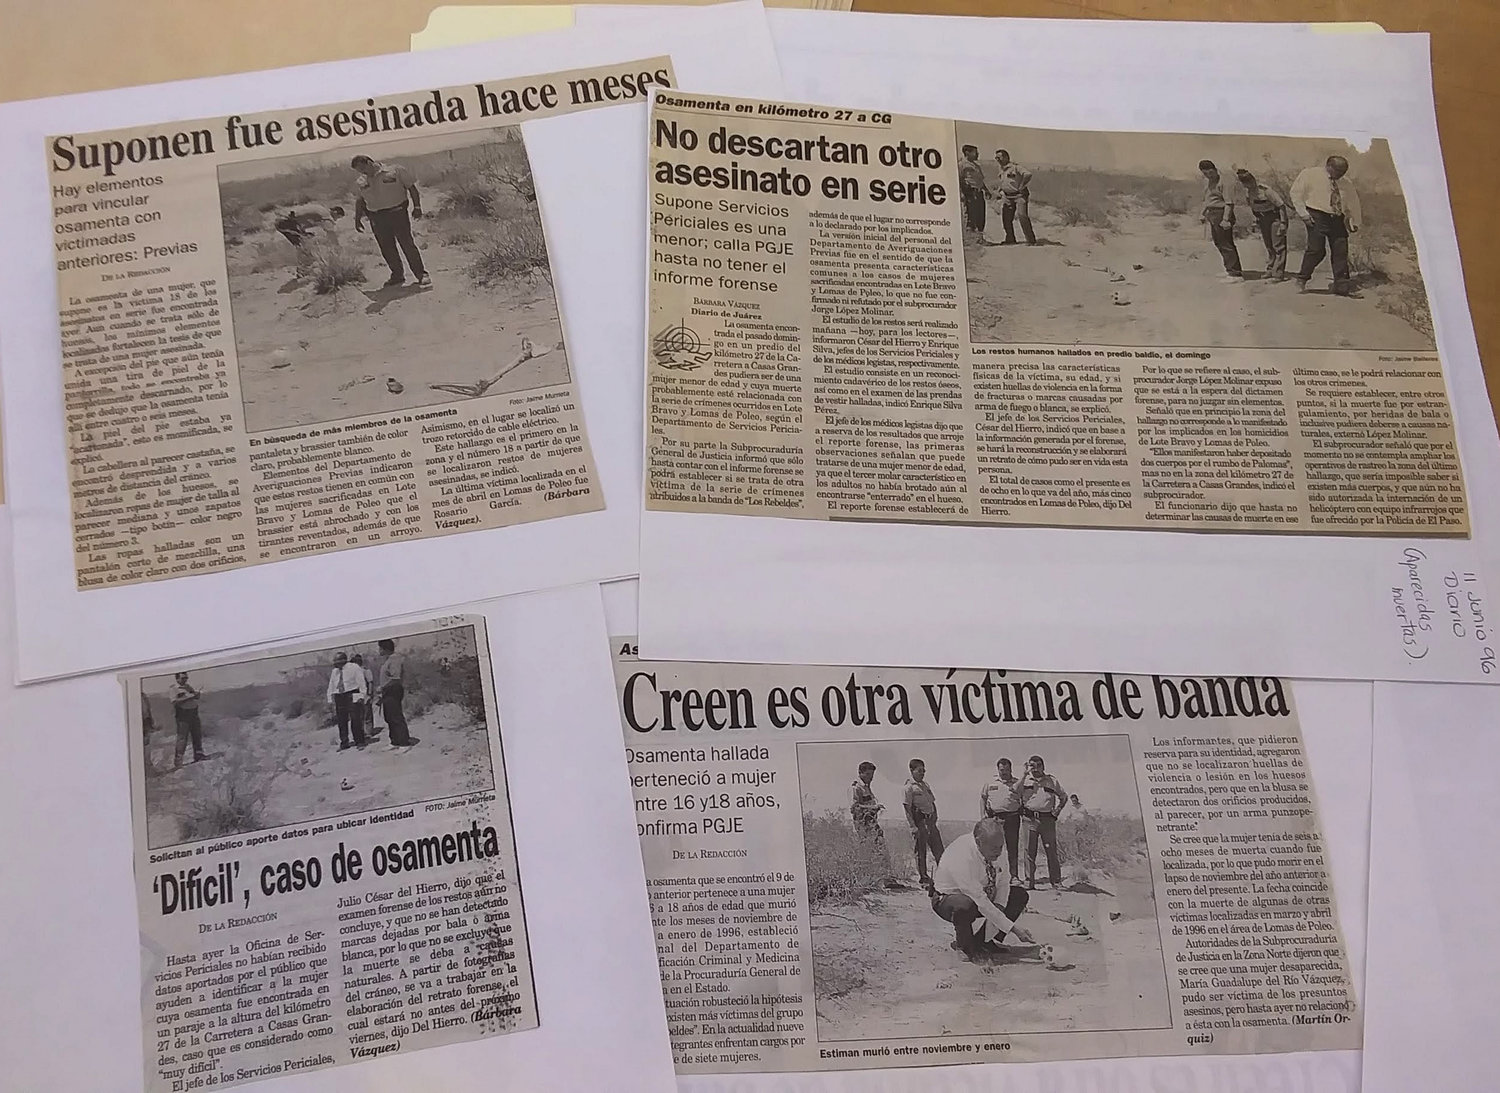 Newspaper clippings from the Esther Chavez Cano Collection housed inside the Rio Grande Historical Collections at New Mexico State University’s Library Archives and Special Collections Department.